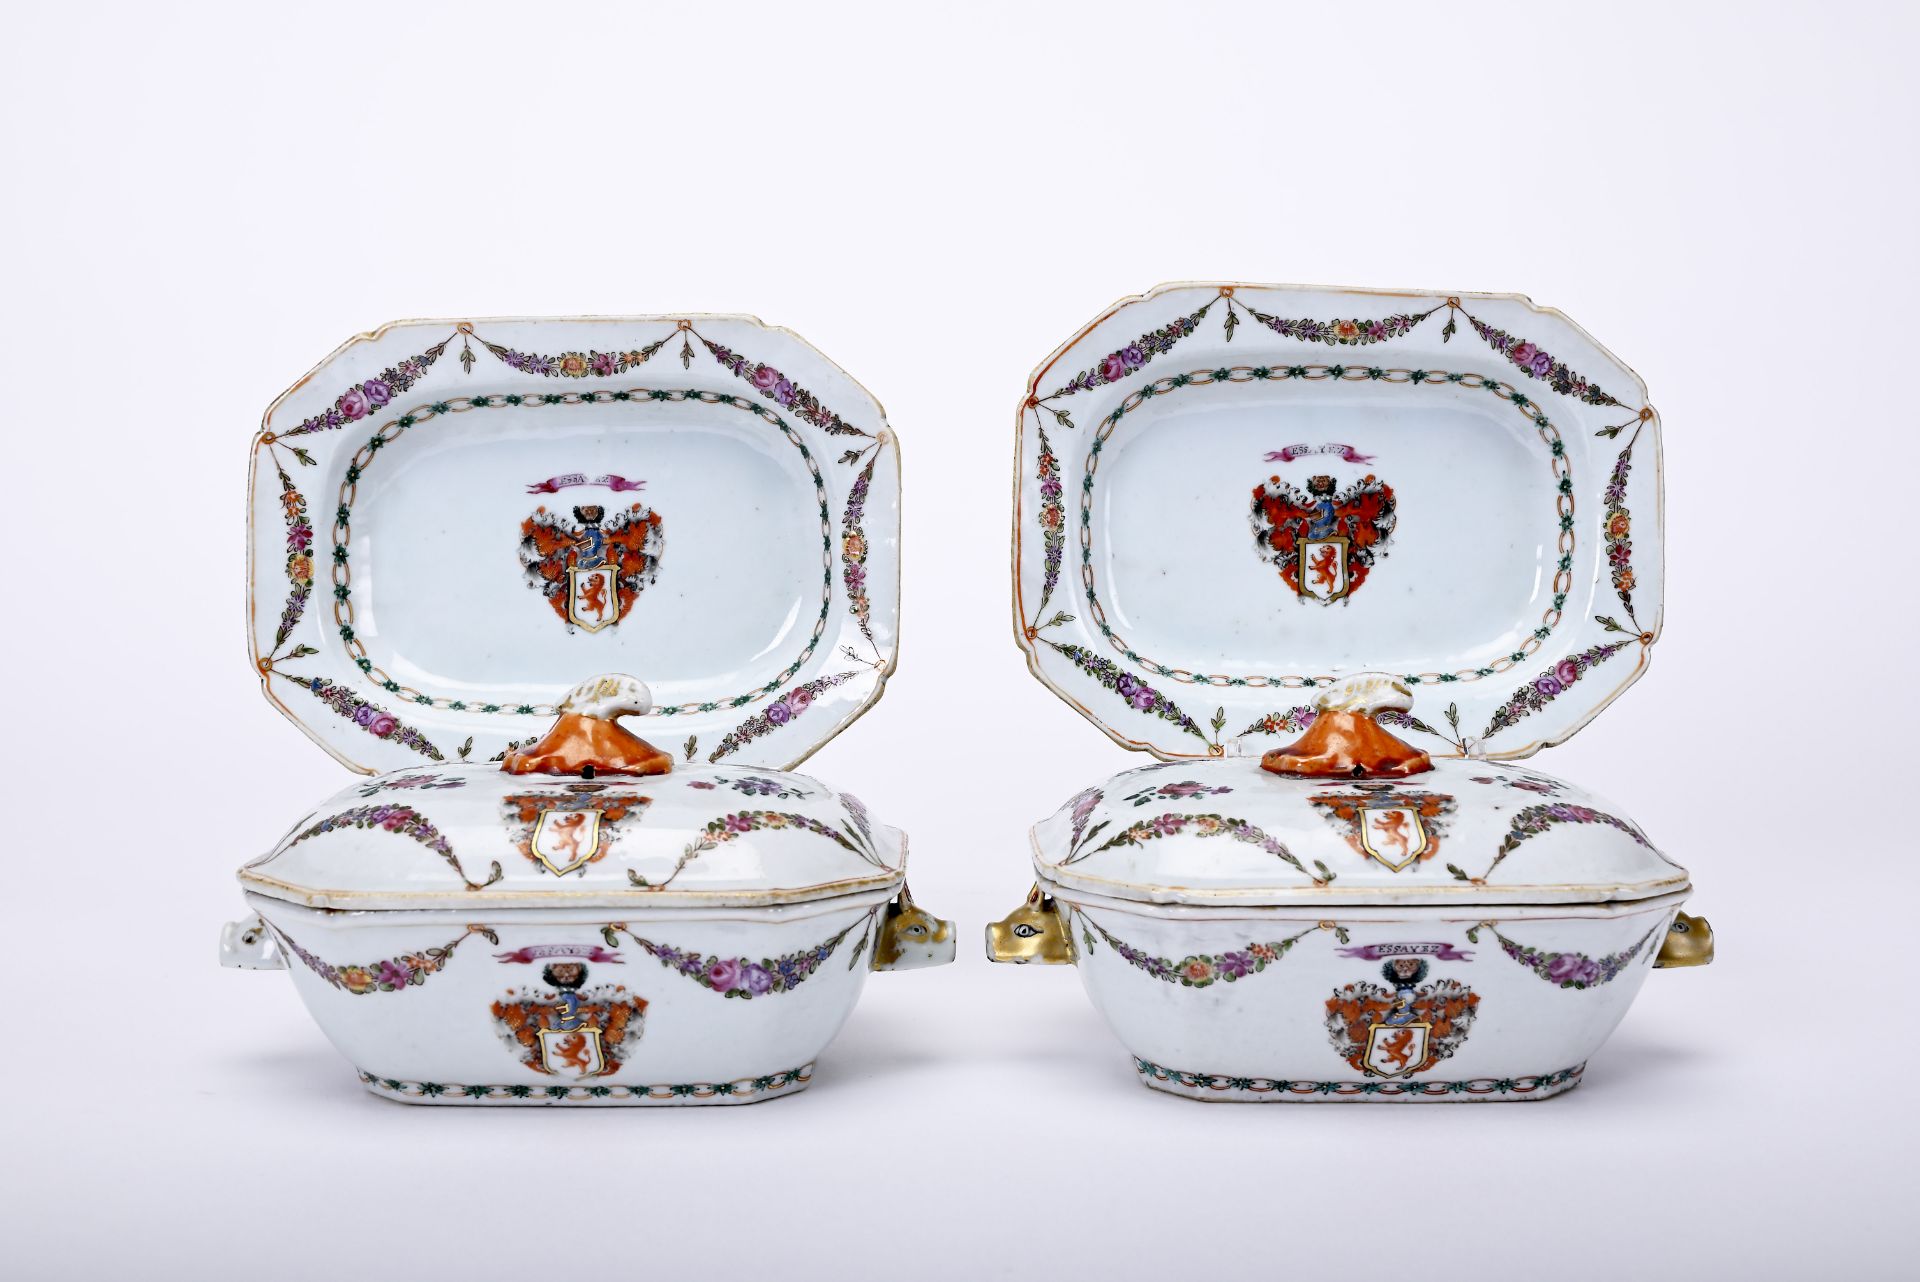 A pair of small tureens with stand - Image 2 of 3